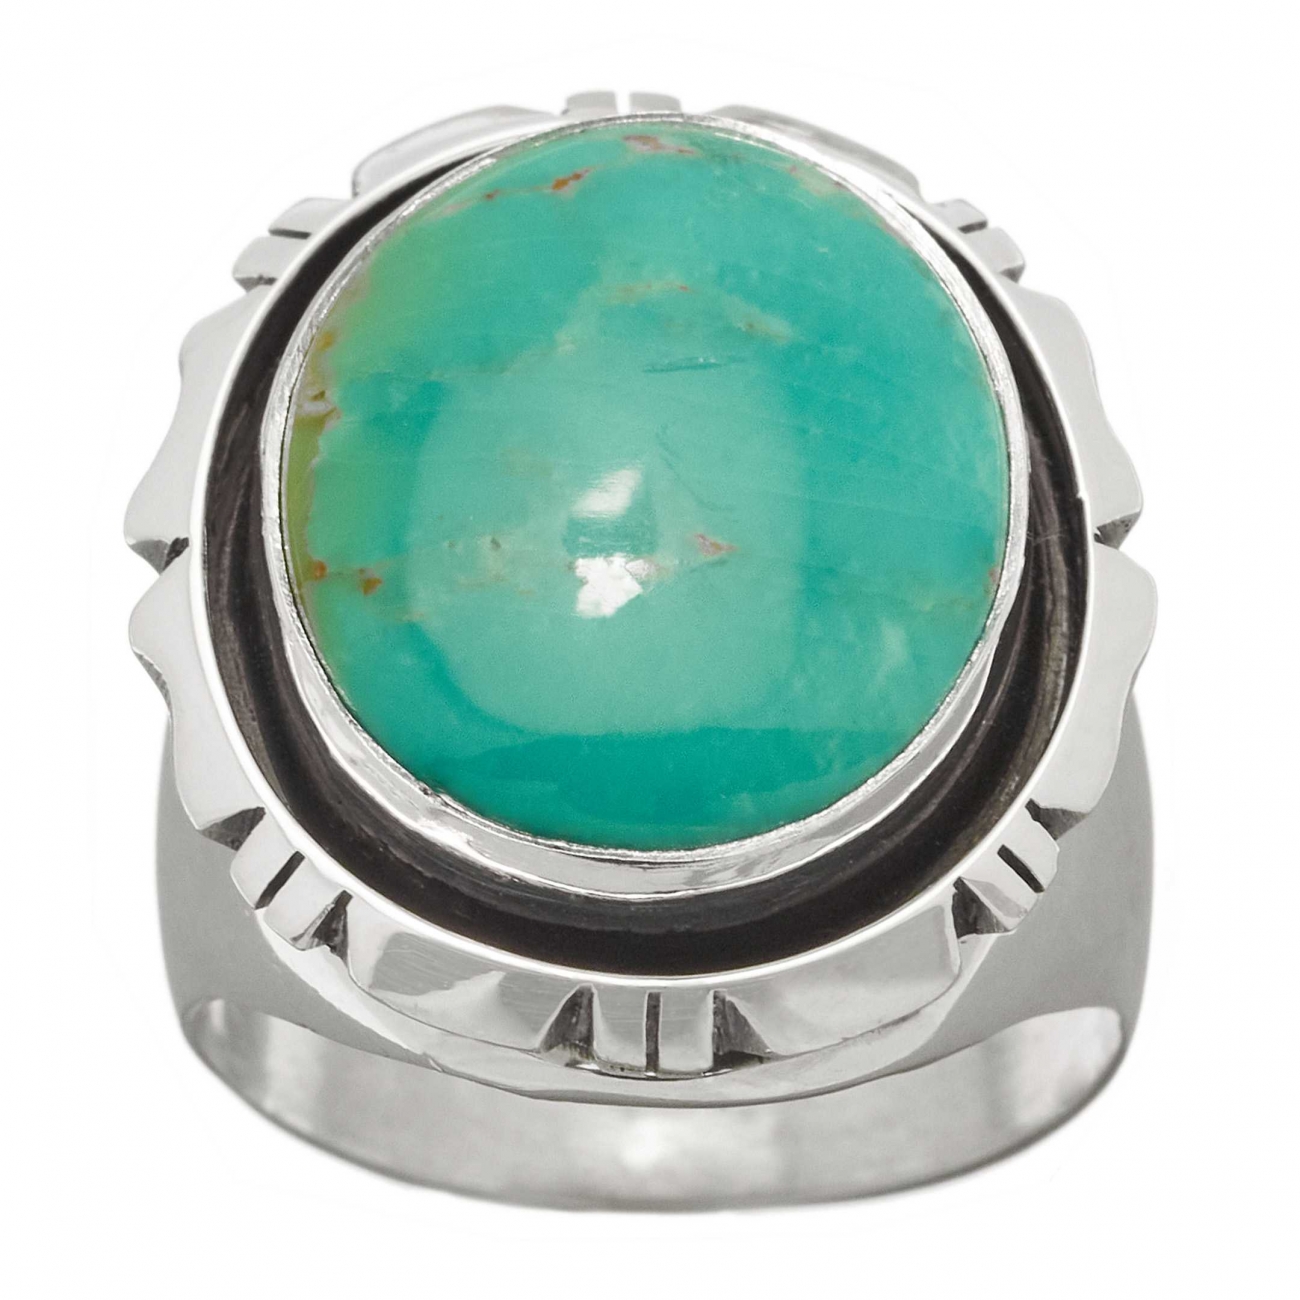 Navajo ring BA930 for men in turquoise and silver - Harpo Paris